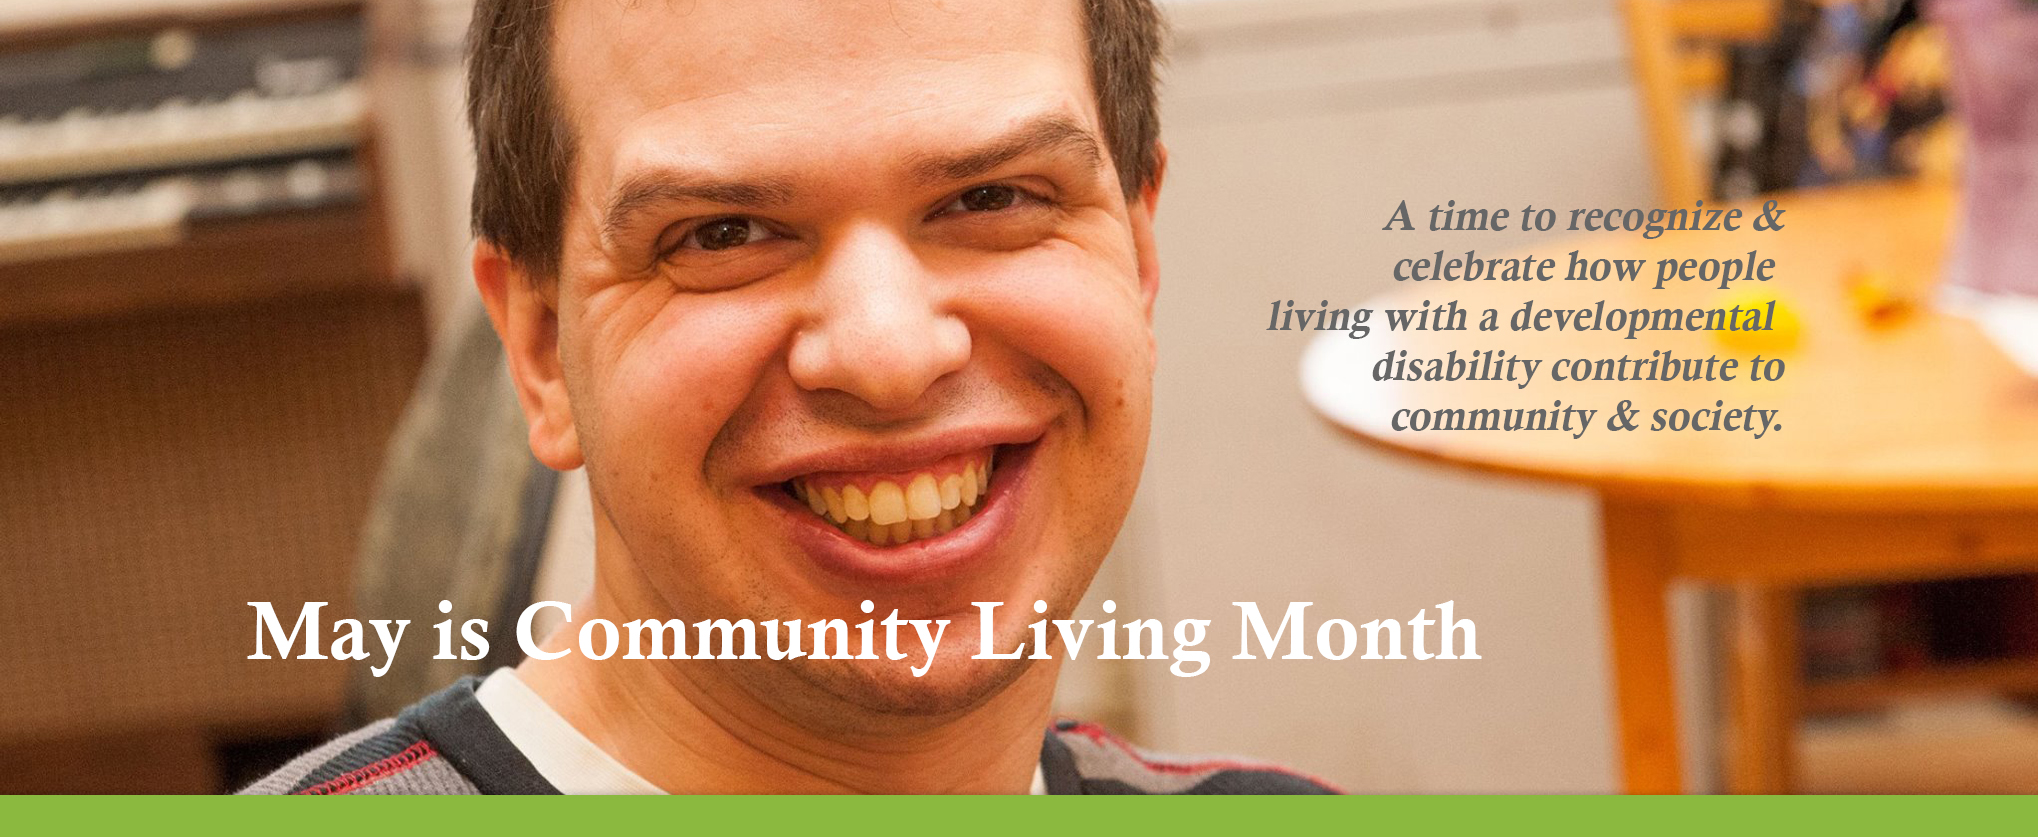 May is Community Living Month SLIDER